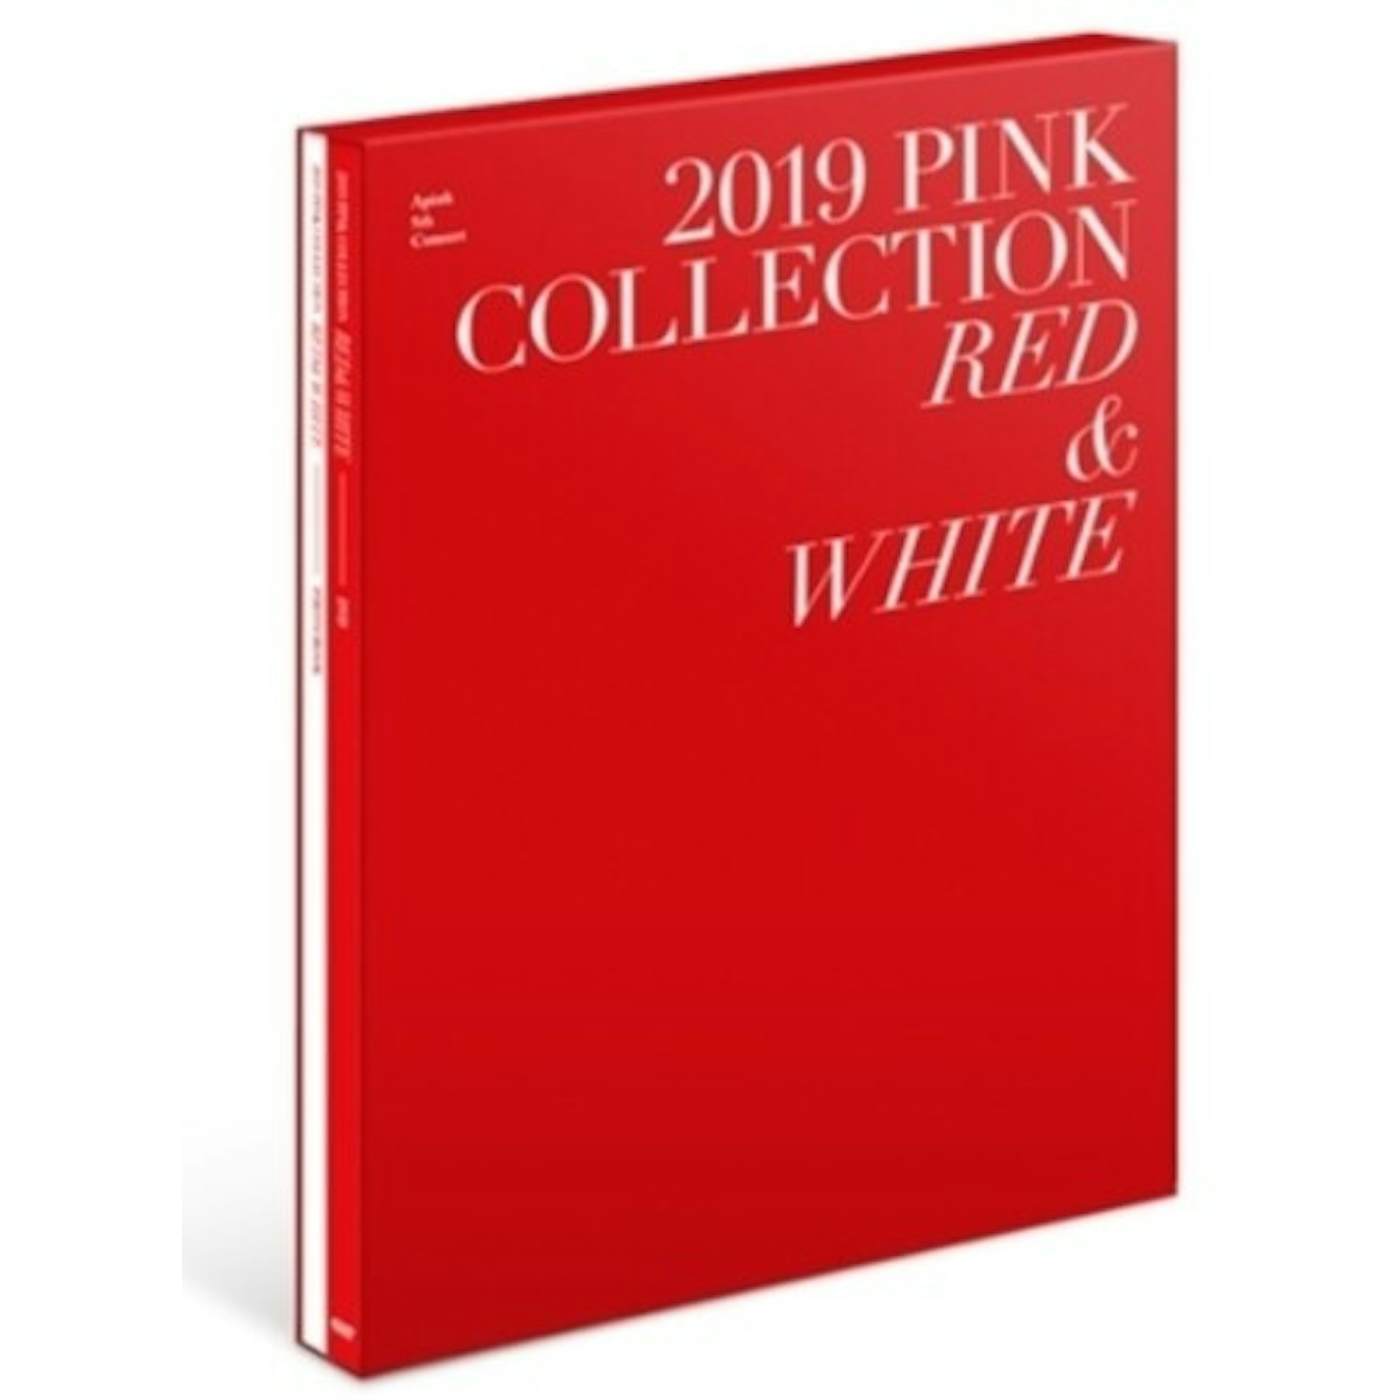 Apink 2019 PINK COLLECTION: RED & WHITE DVD